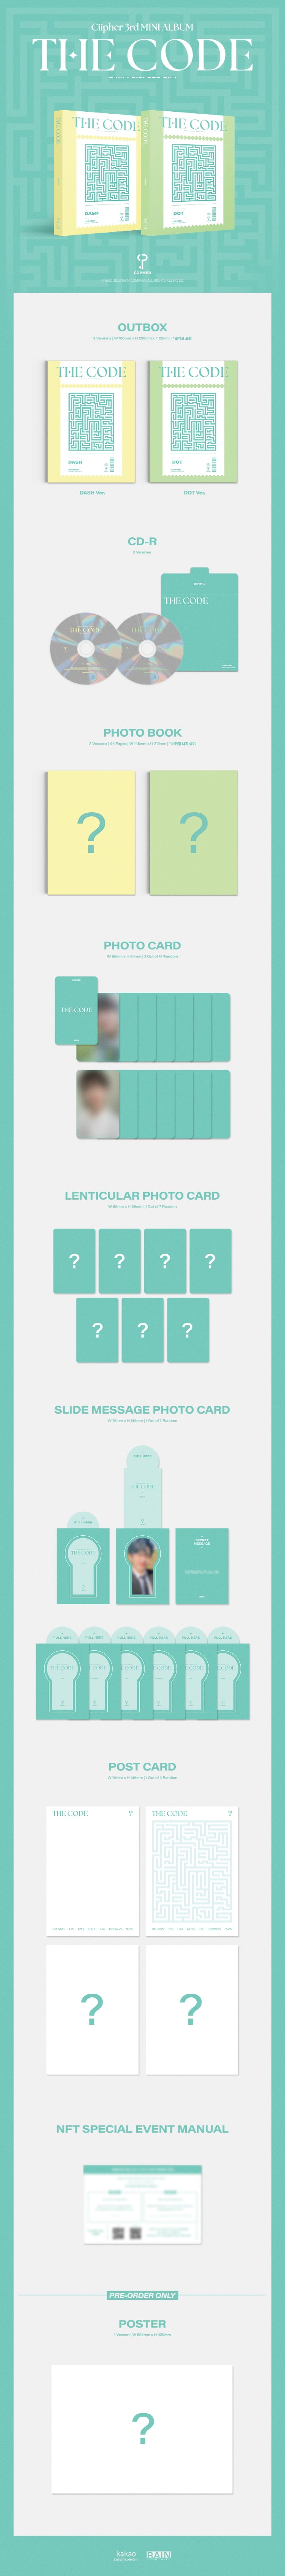 1 CD
1 Photo Book (64 pages)
2 Photo Cards (random out of 14 types)
1 Lenticular Photo Card (random out of 7 types)
1 Slid...